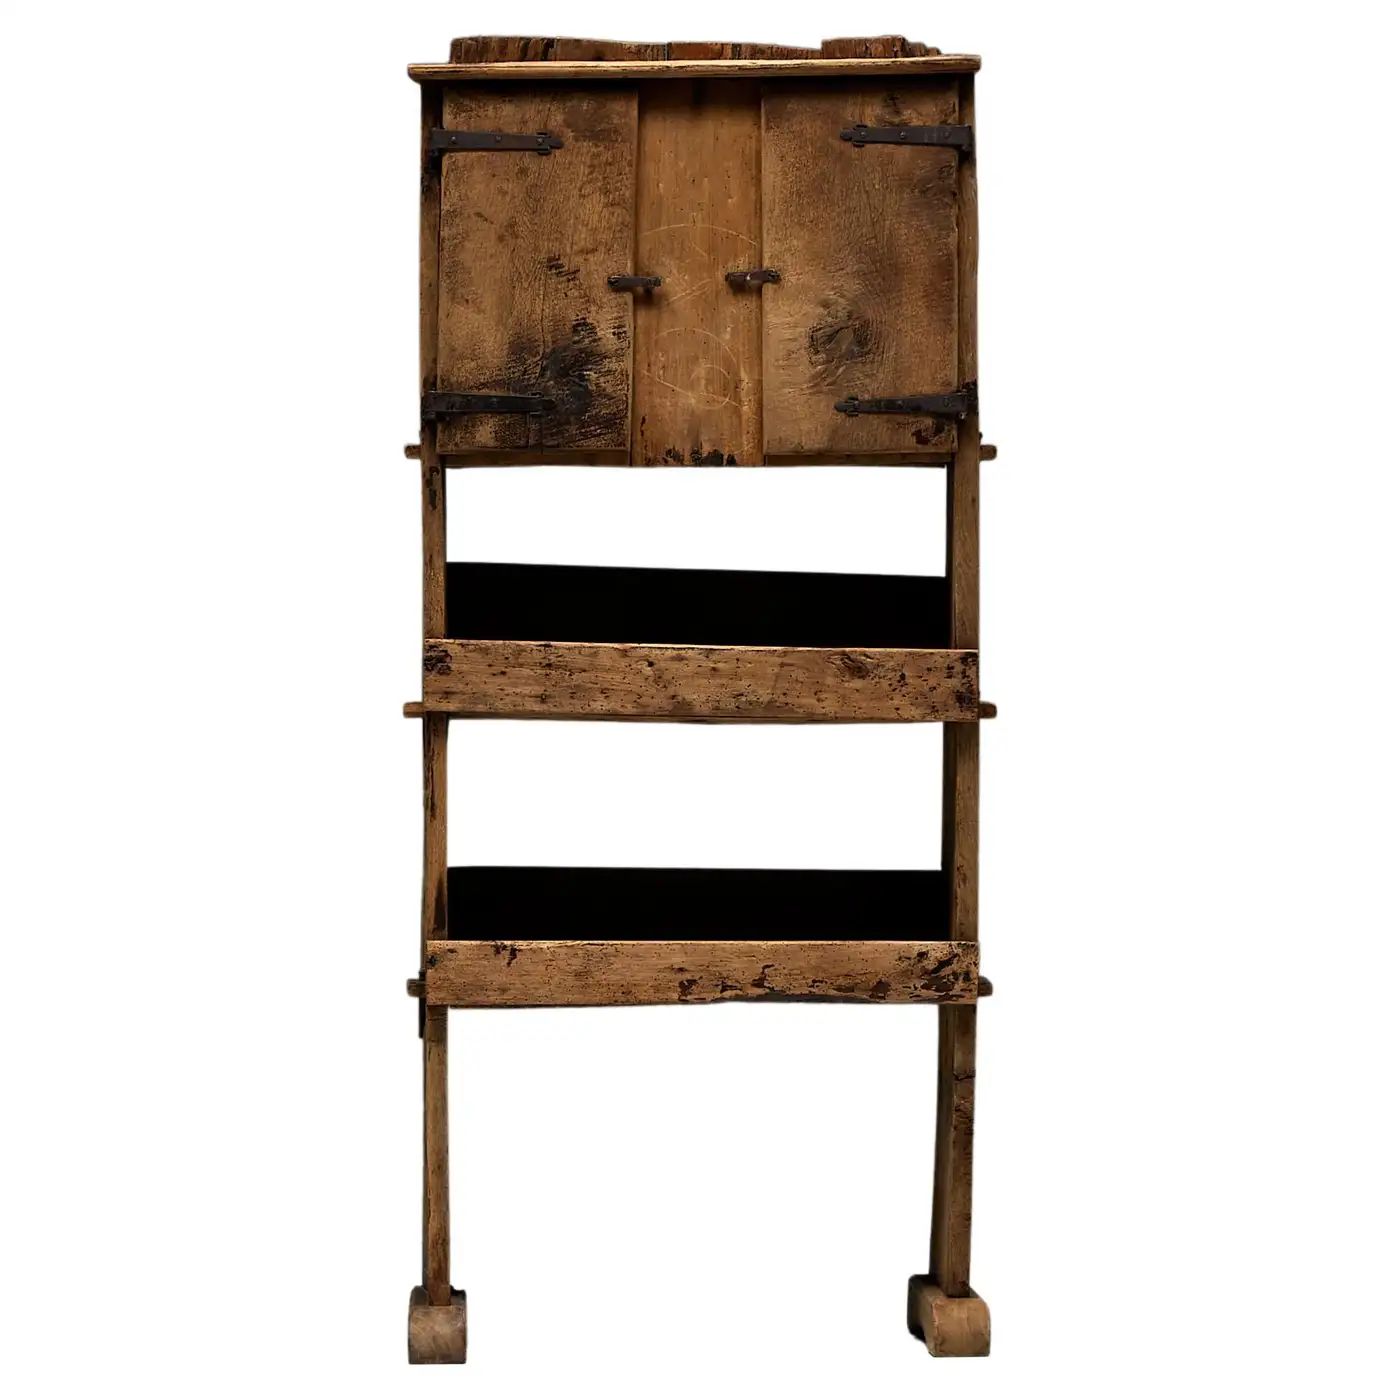 Rustic Art Populaire Sideboard, France, Mid-20th Century | 1stDibs